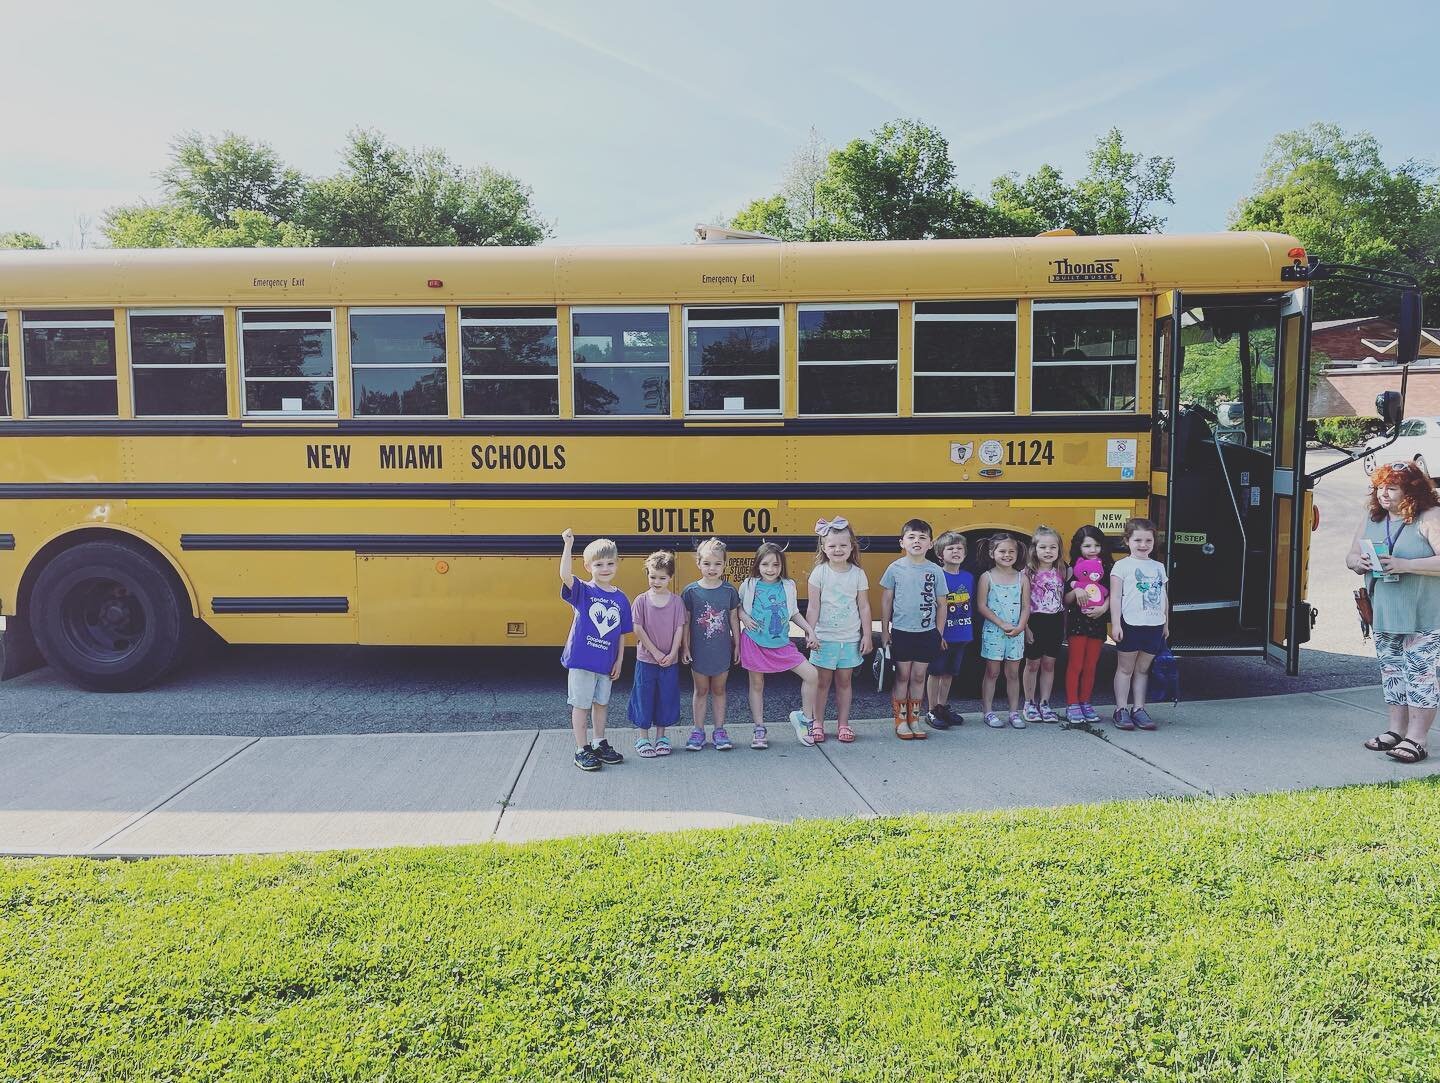 The Fabulous 4&rsquo;s end of school year bus trip! The kids and teachers share a day of fun with a field trip!

#earlyeducation #preschool #cincinnati #loveland #kids